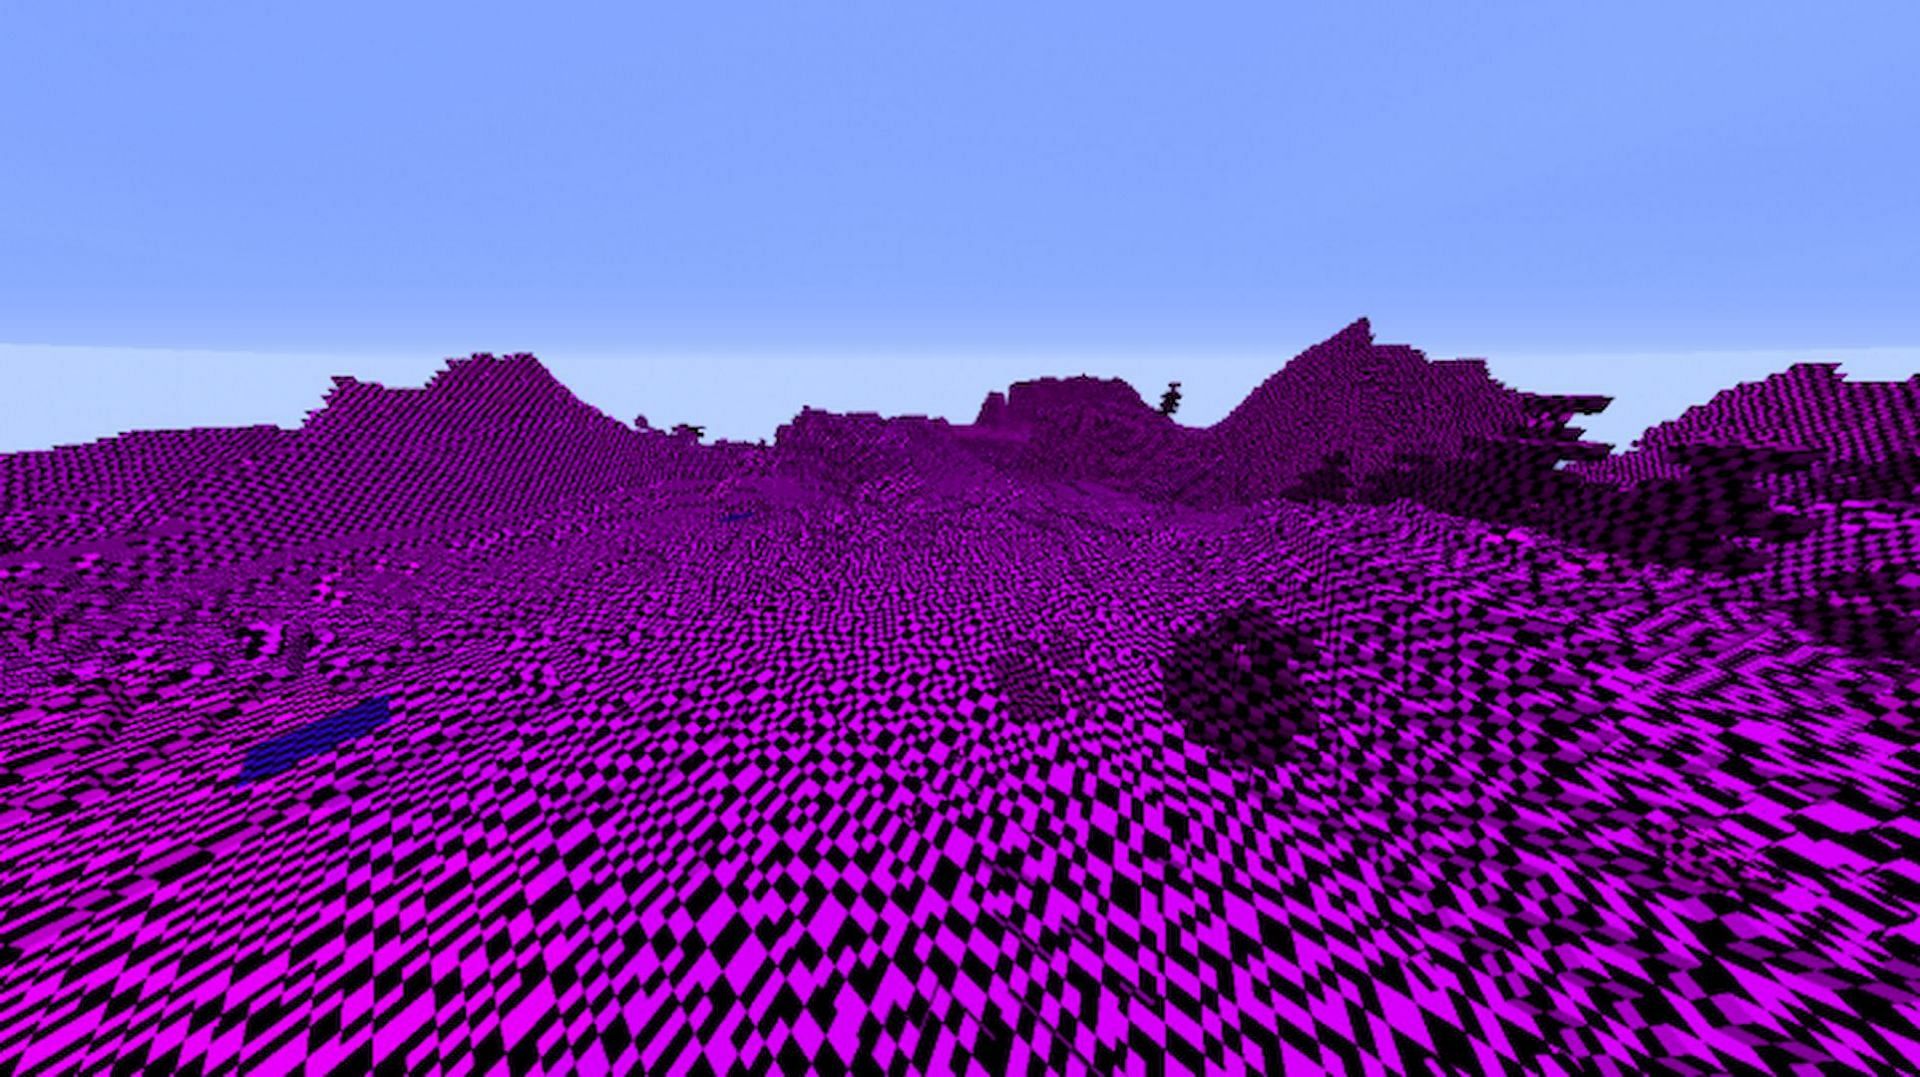 Some other players have experienced worlds with the no texture block. (Image via planetminecraft.com.)